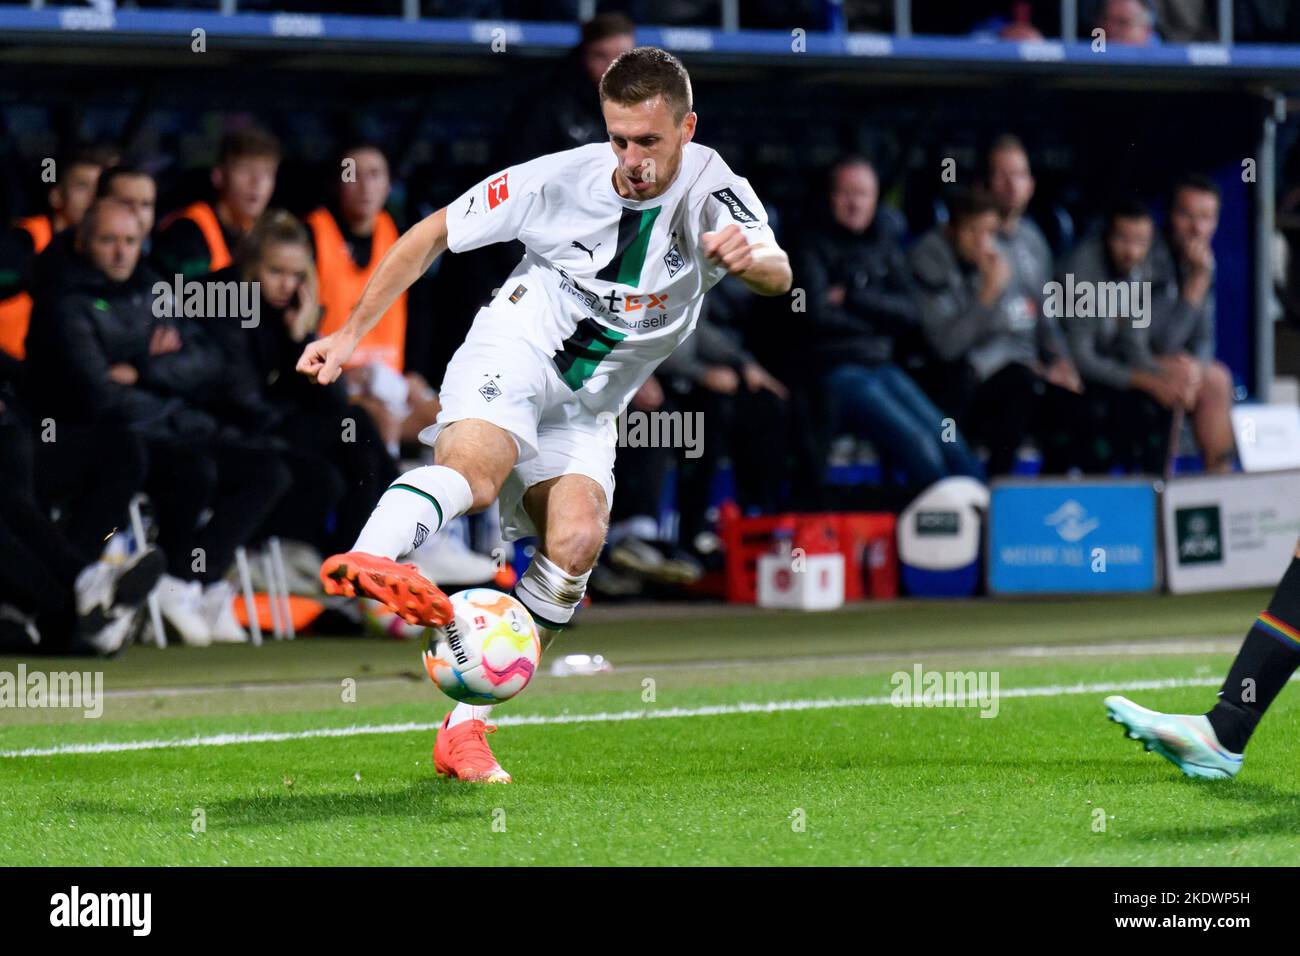 Patrick HERRMANN (MG) with ball, single action with ball, action, full length, whole figure, cut out, single image, single player, single action, football 1st Bundesliga, 14th matchday, VfL Bochum (BO) - Borussia Monchengladbach ( MG) 2: 1, on November 8th, 2022 in Bochum/Germany. Stock Photo